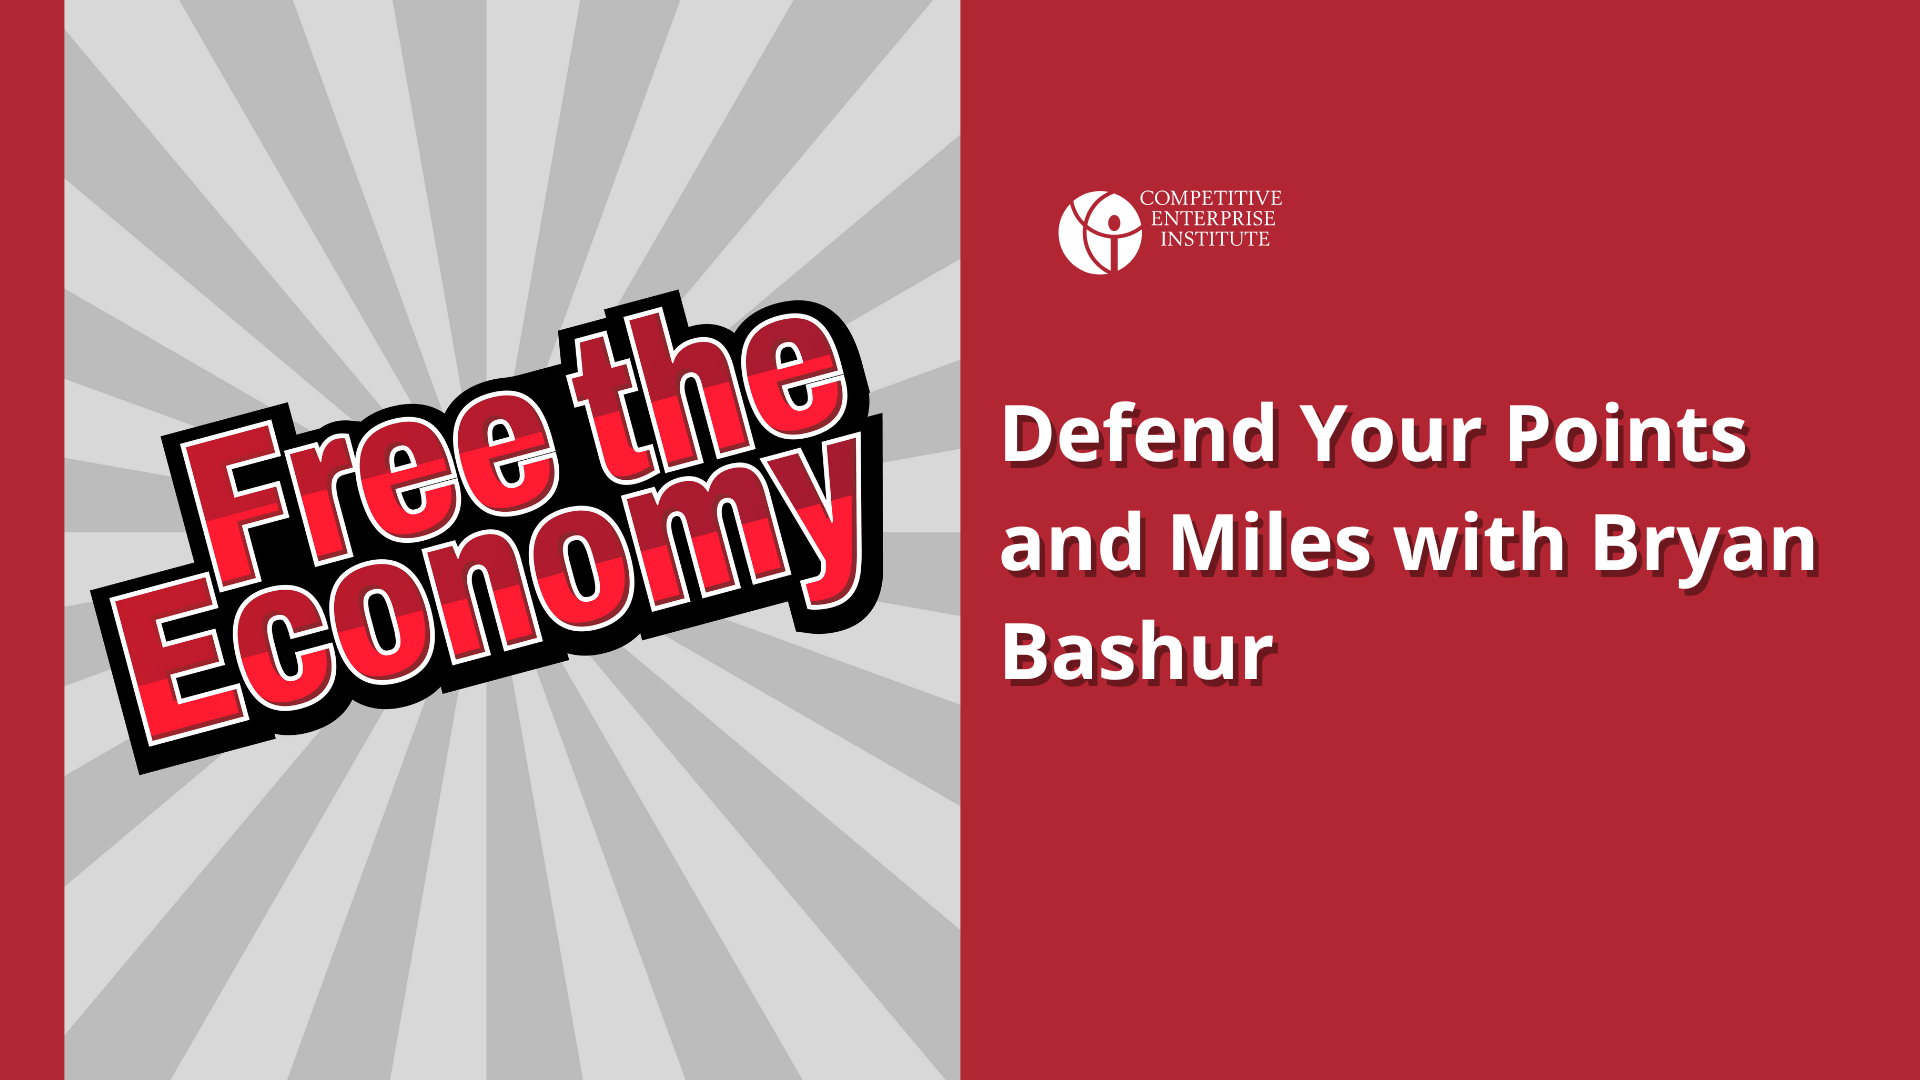 Defend Your Points and Miles with Bryan Bashur